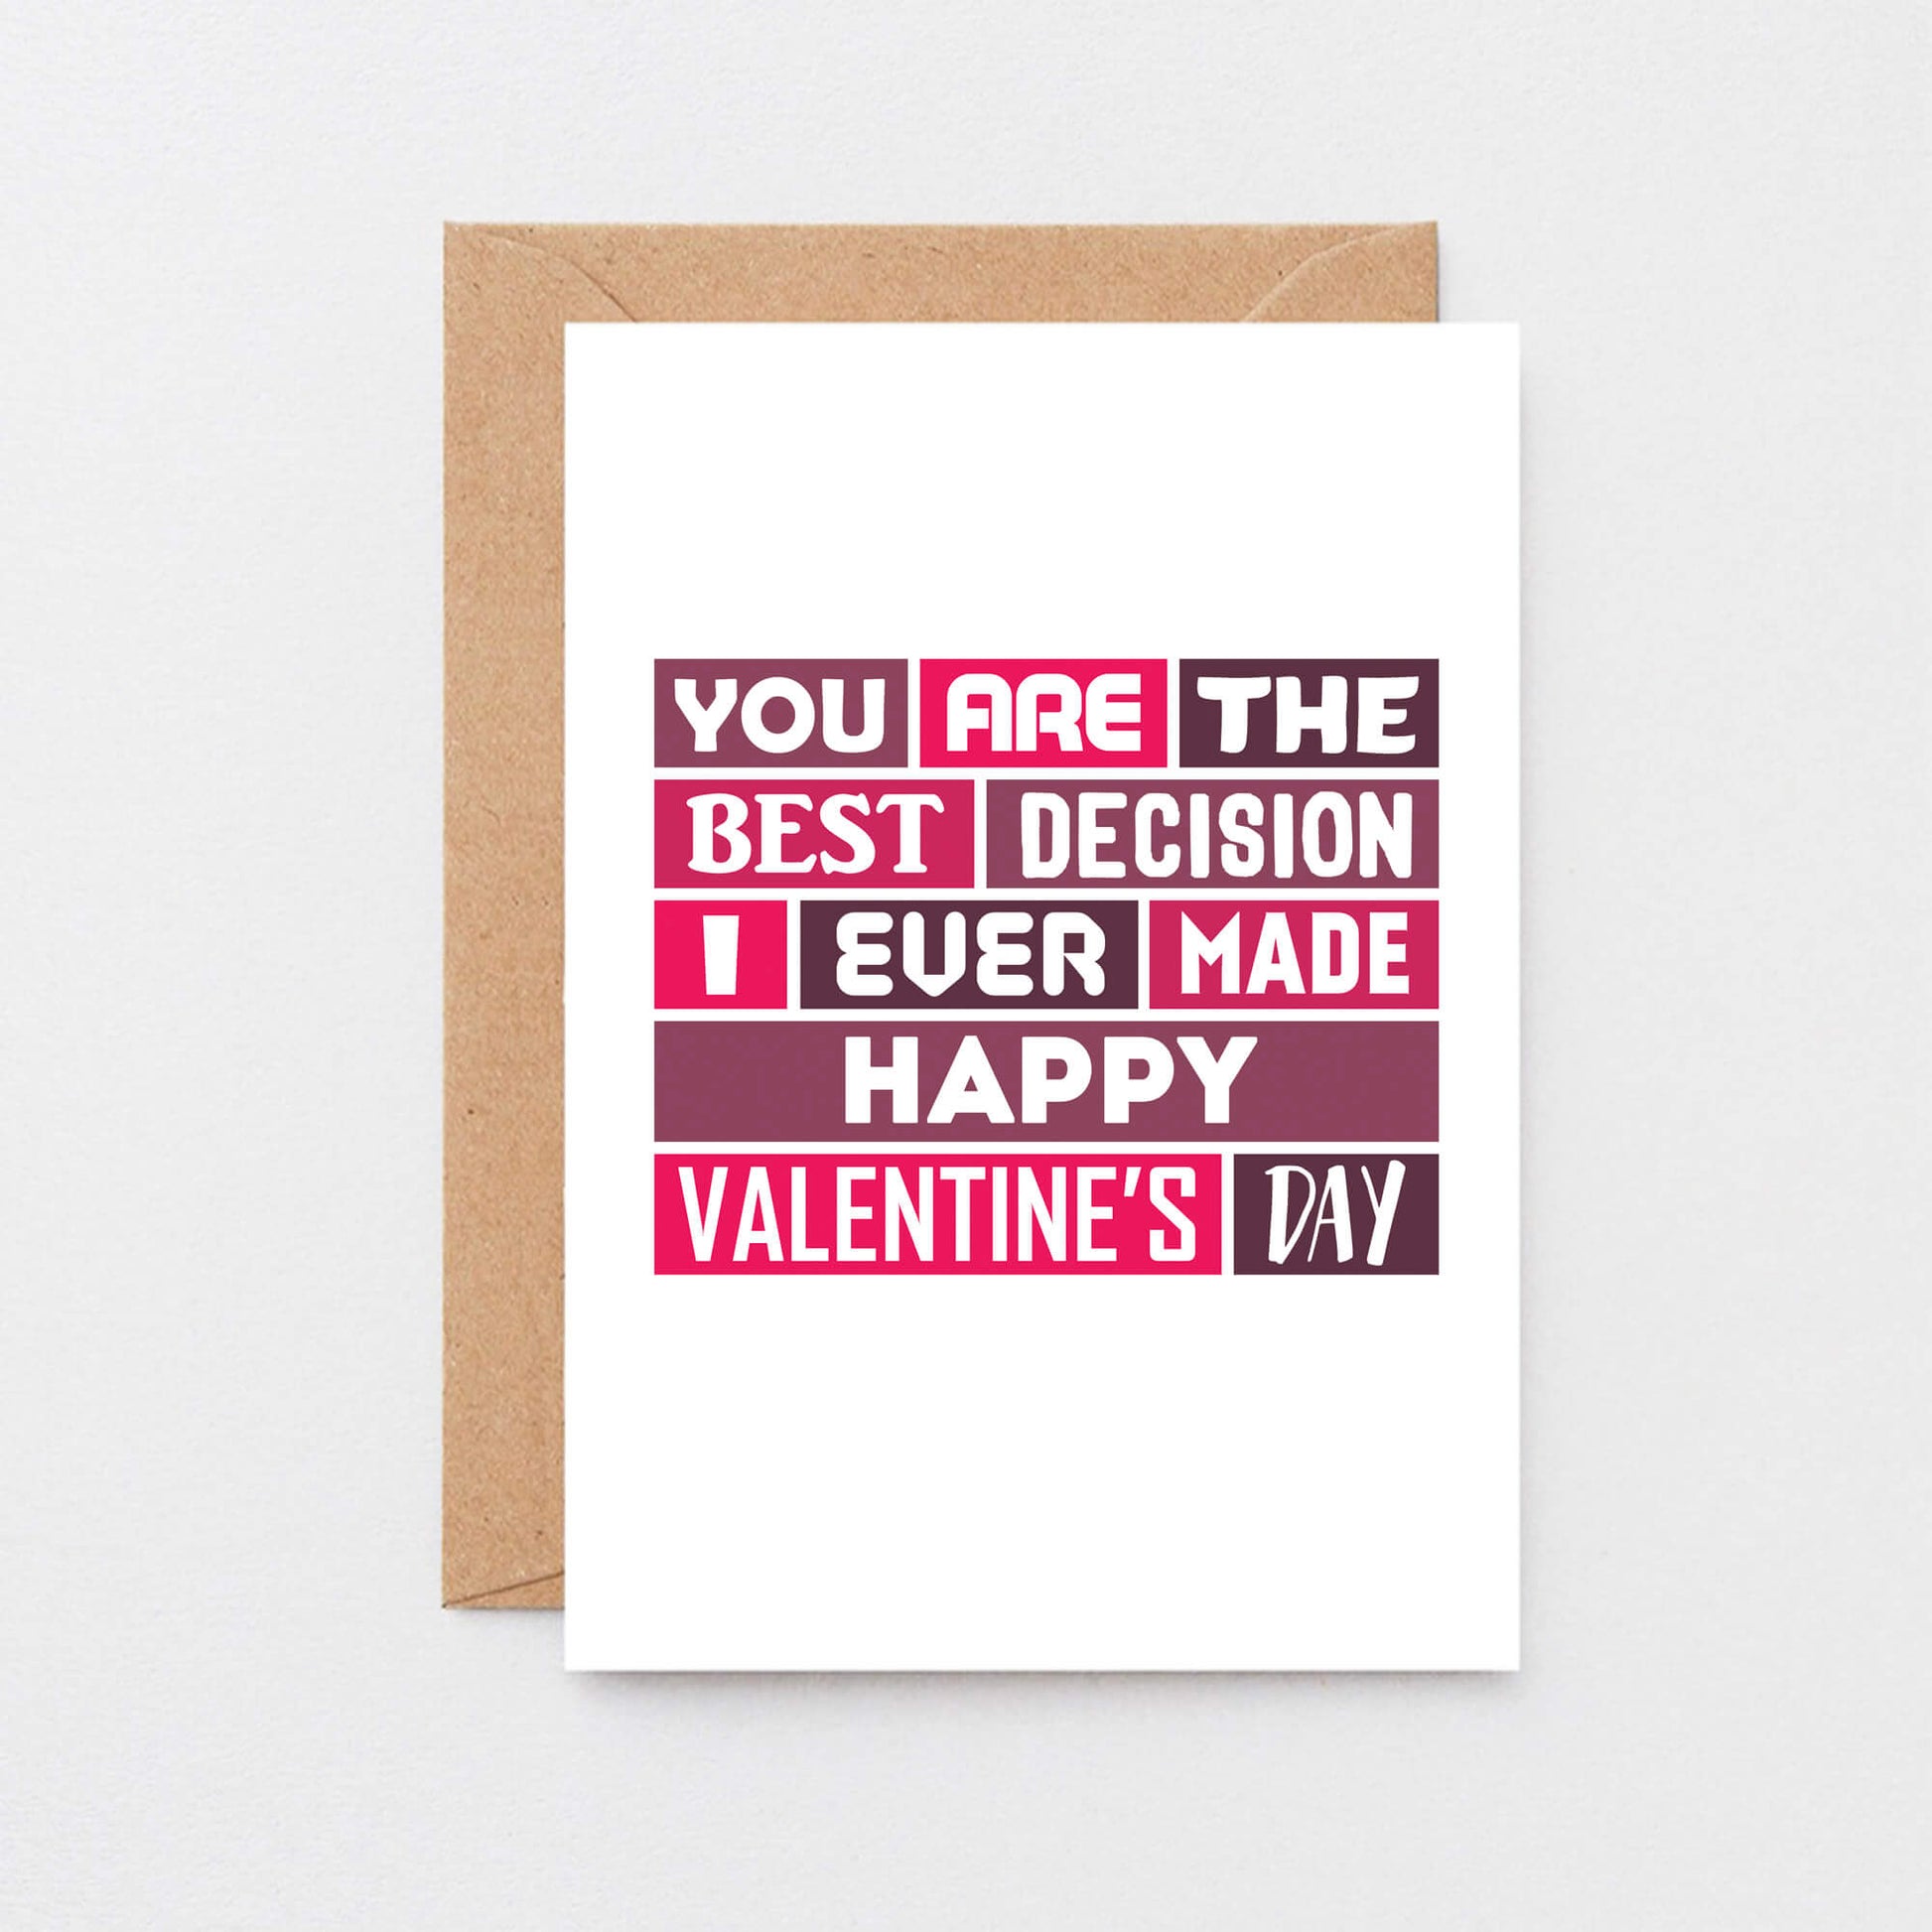 Valentine Card by SixElevenCreations. Reads You are the best decision I ever made. Happy Valentine's Day. Product Code SEV0010A6